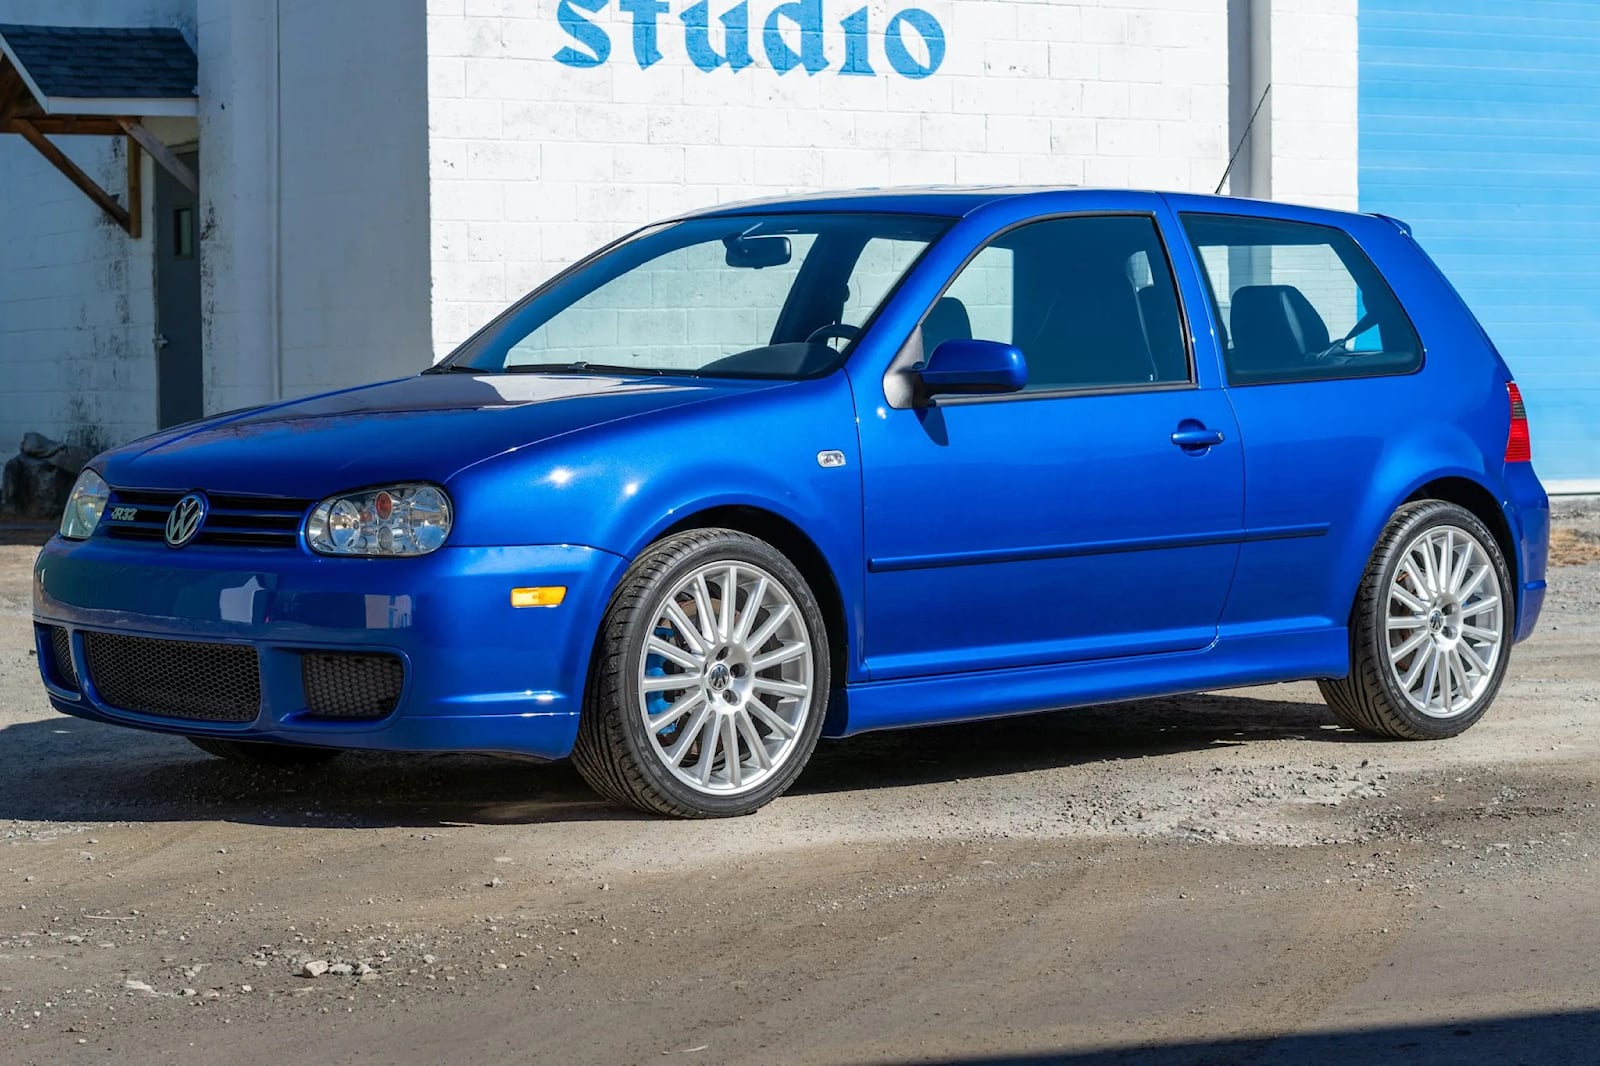 2004 Volkswagen R32 For Sale Has Just 97 Miles On Clock CarBuzz